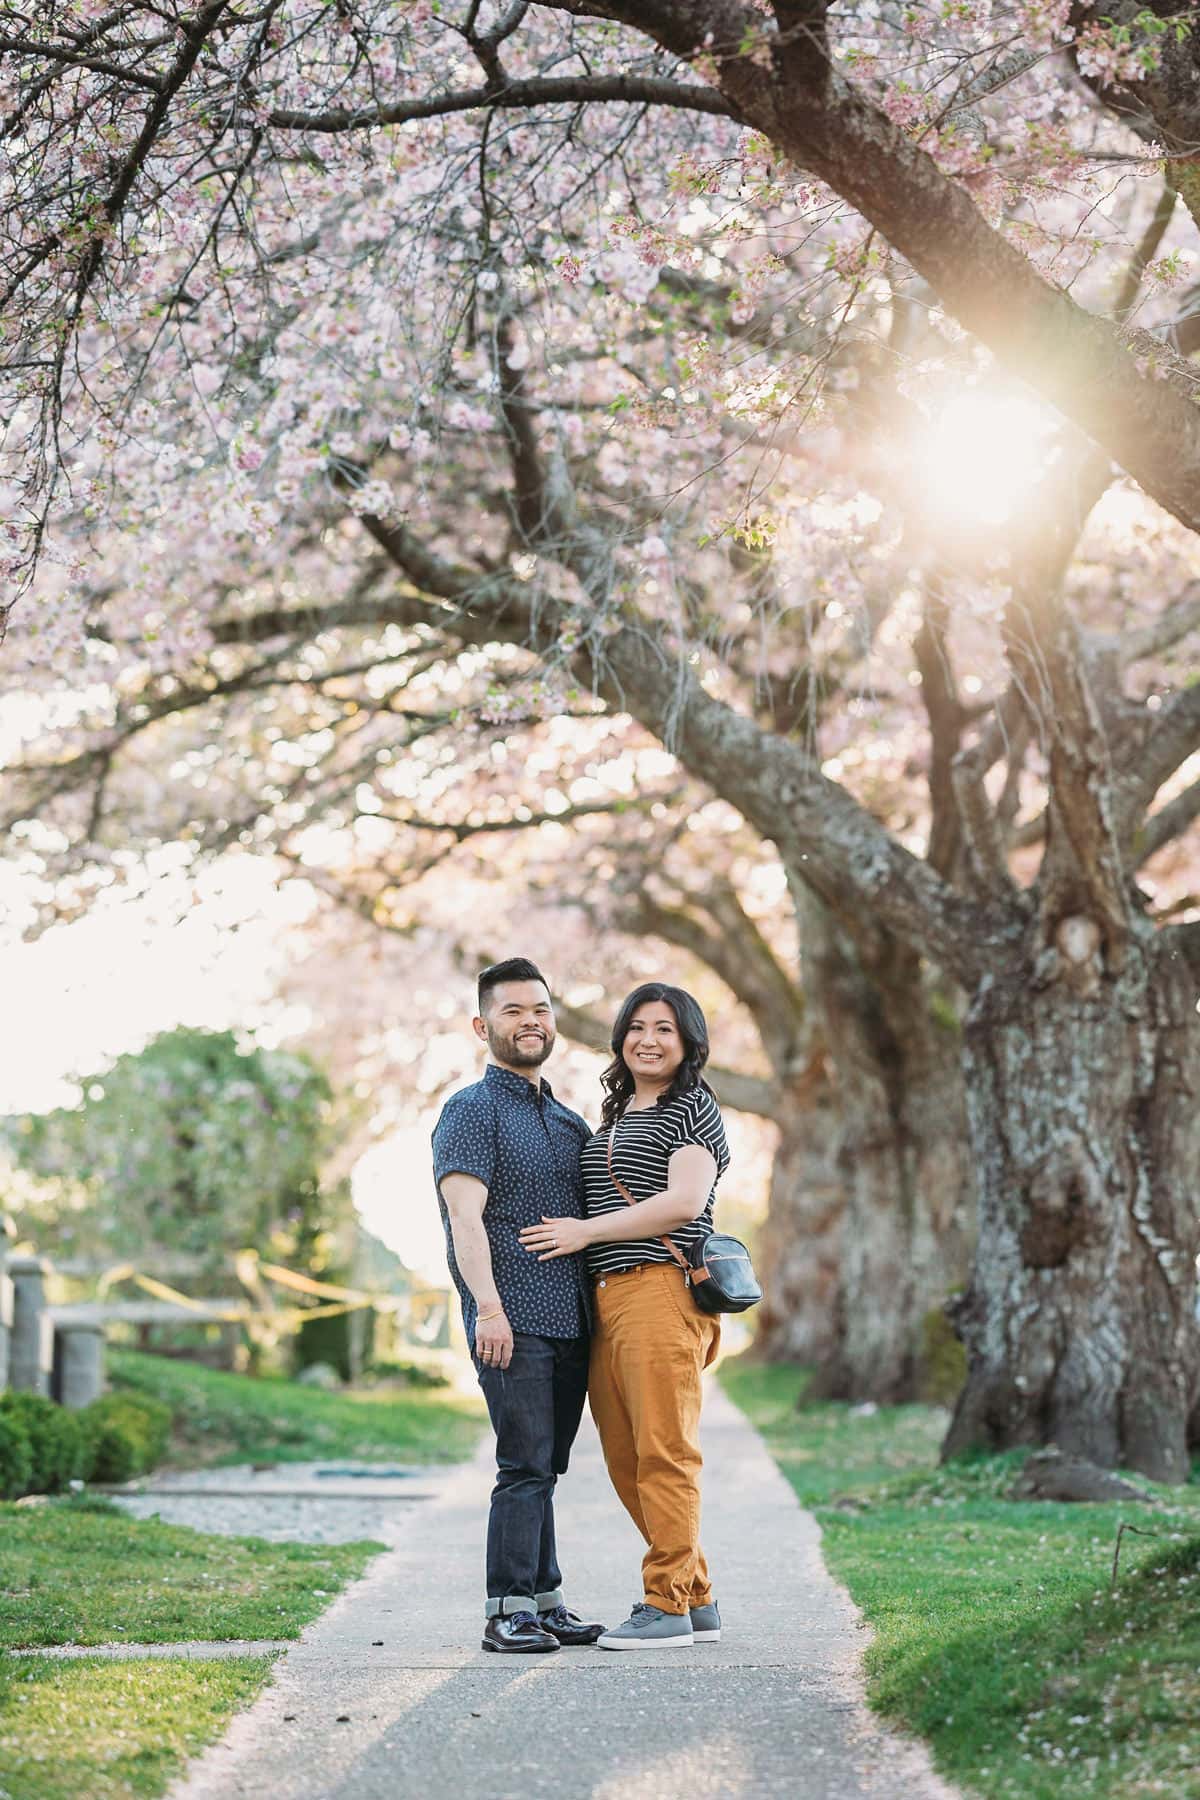 casual fun engagament photos in Vancouver cherry blossoms